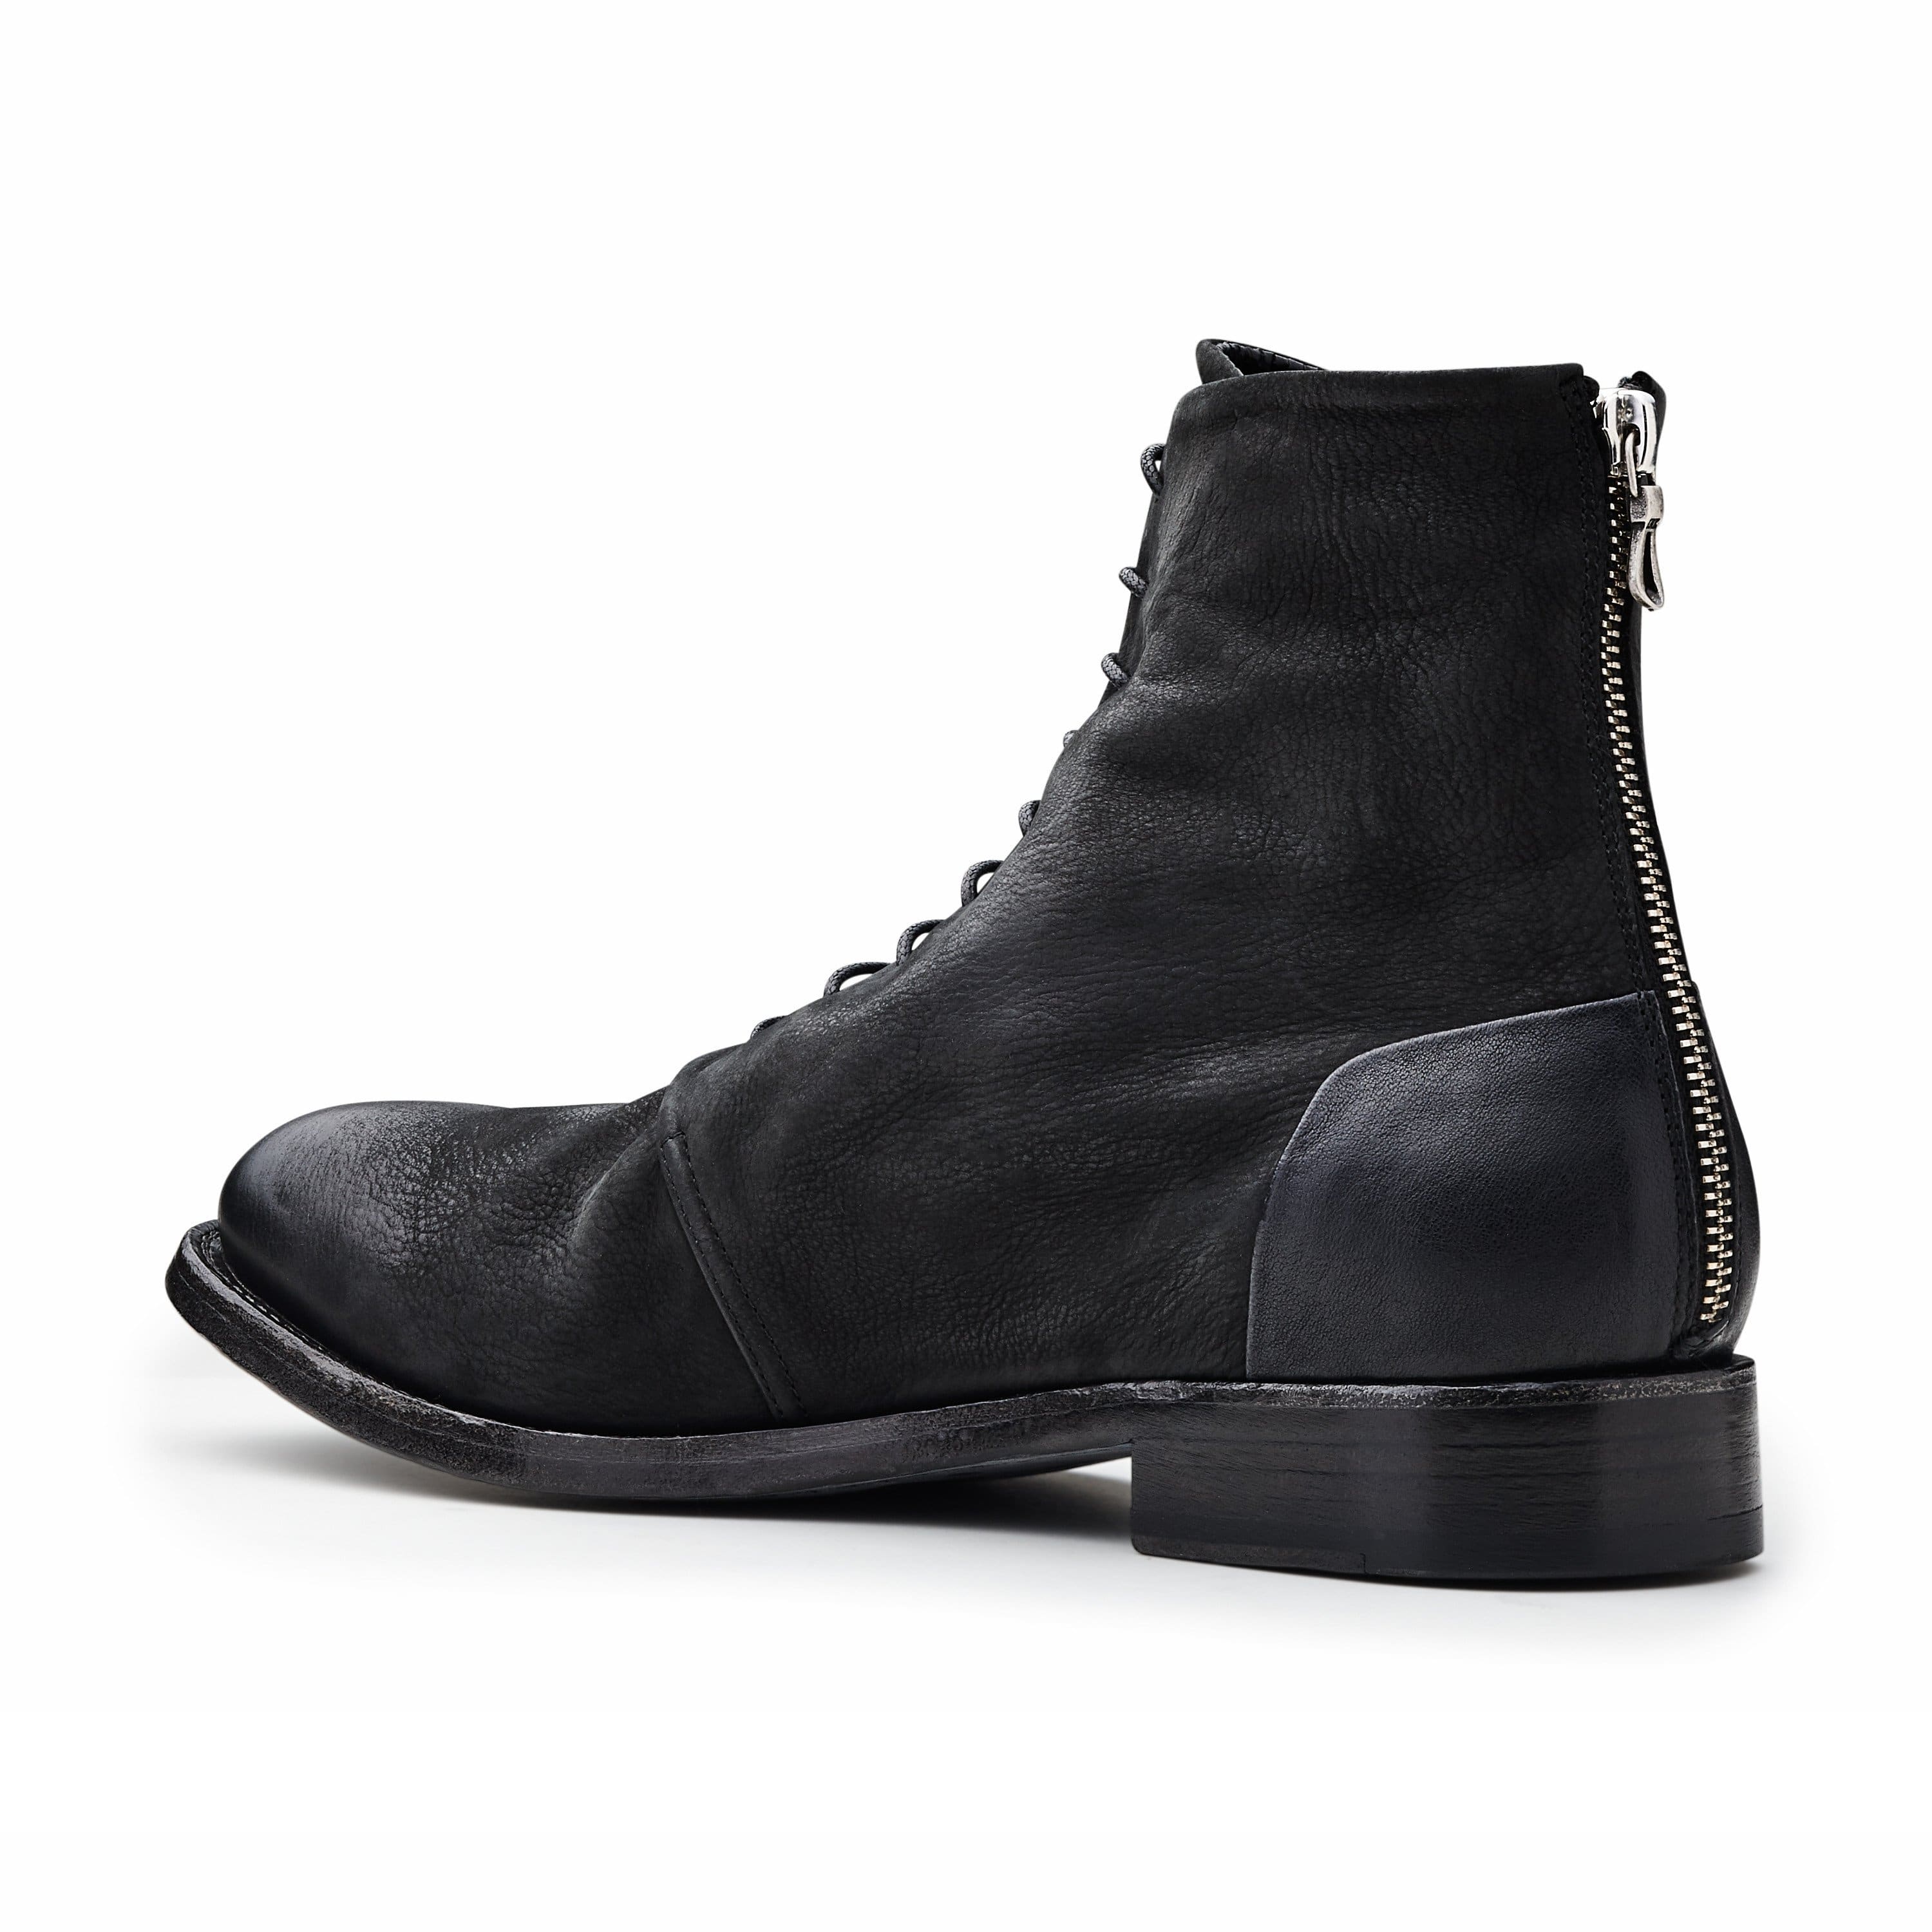 Ink C/124 Nero Ankle Boot - 124 Shoes